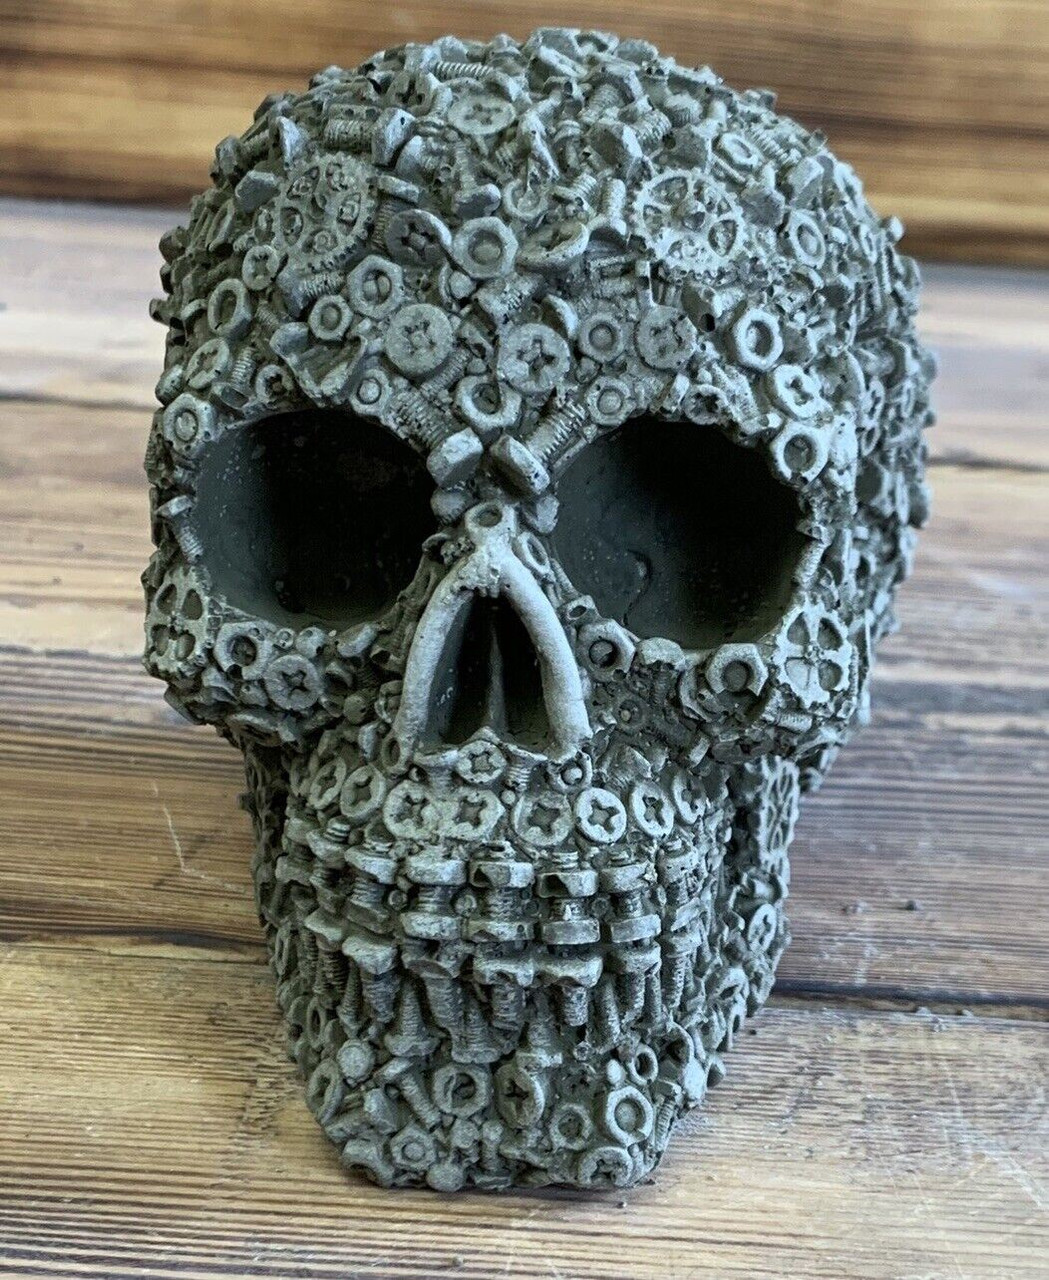 STONE GARDEN NUTS AND BOLTS SKULL GOTHIC HUMAN HEAD ORNAMENT STATUE